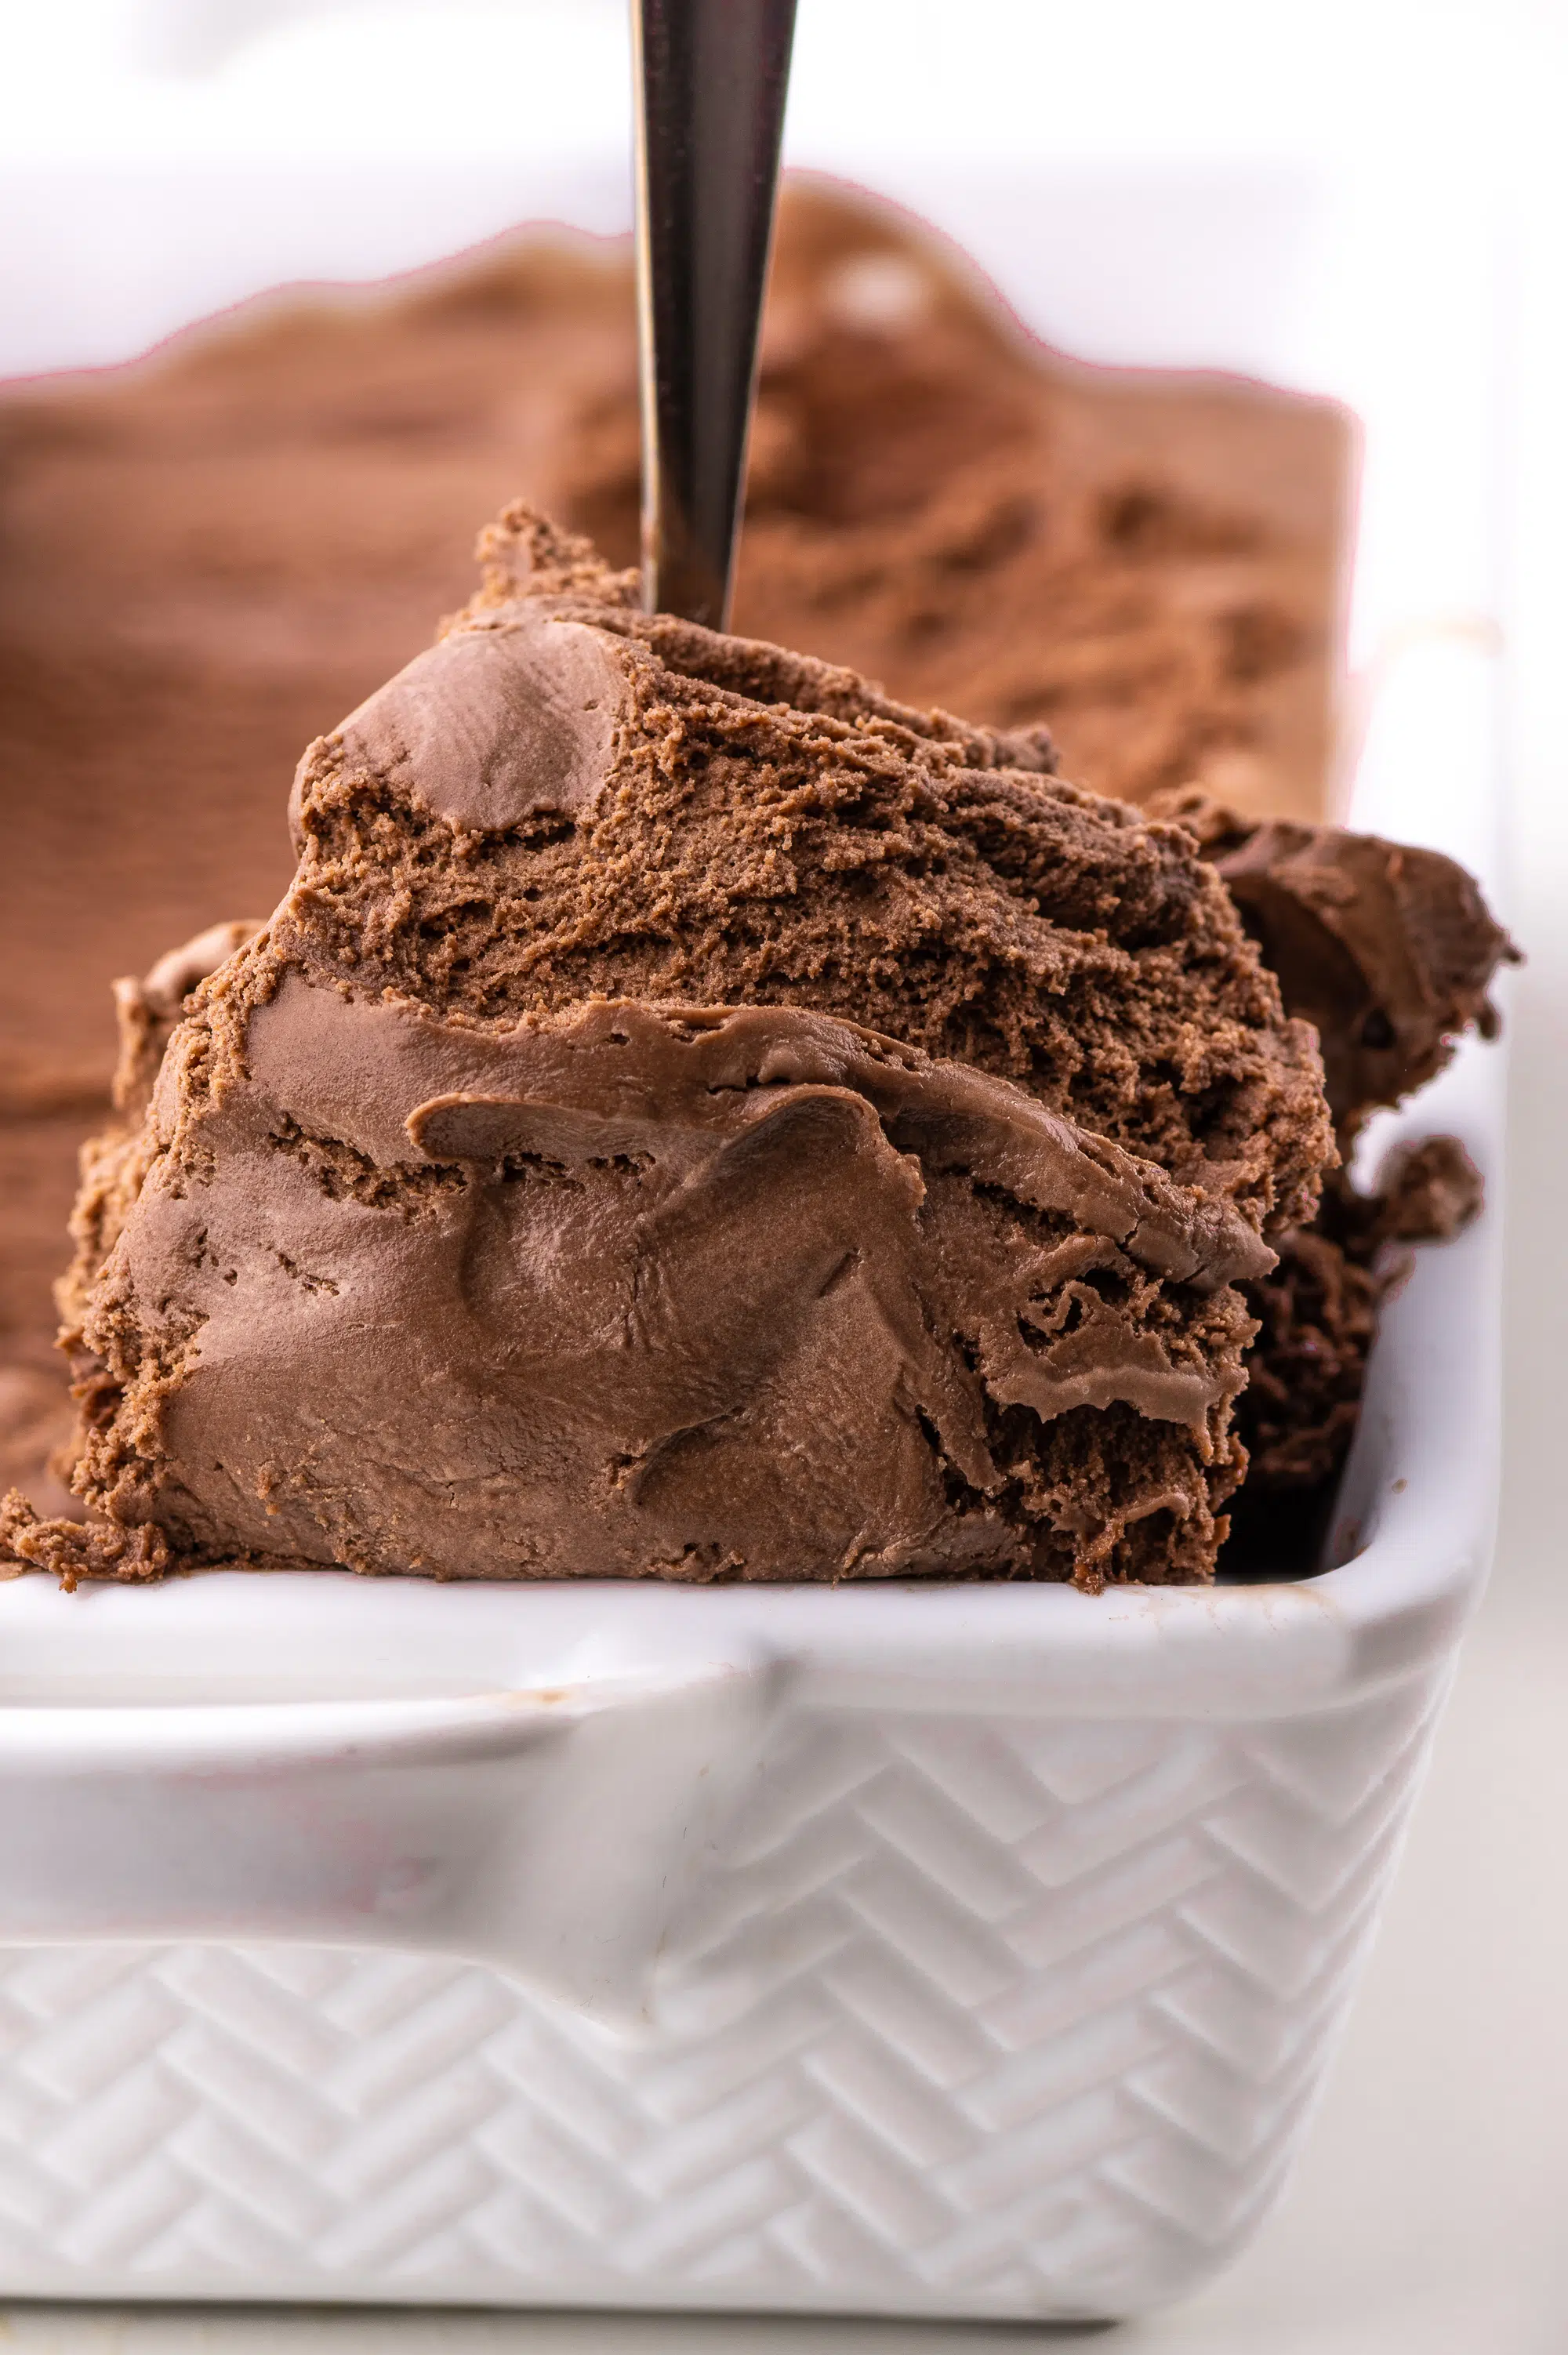 Keto chocolate ice cream being scooped from a dish.